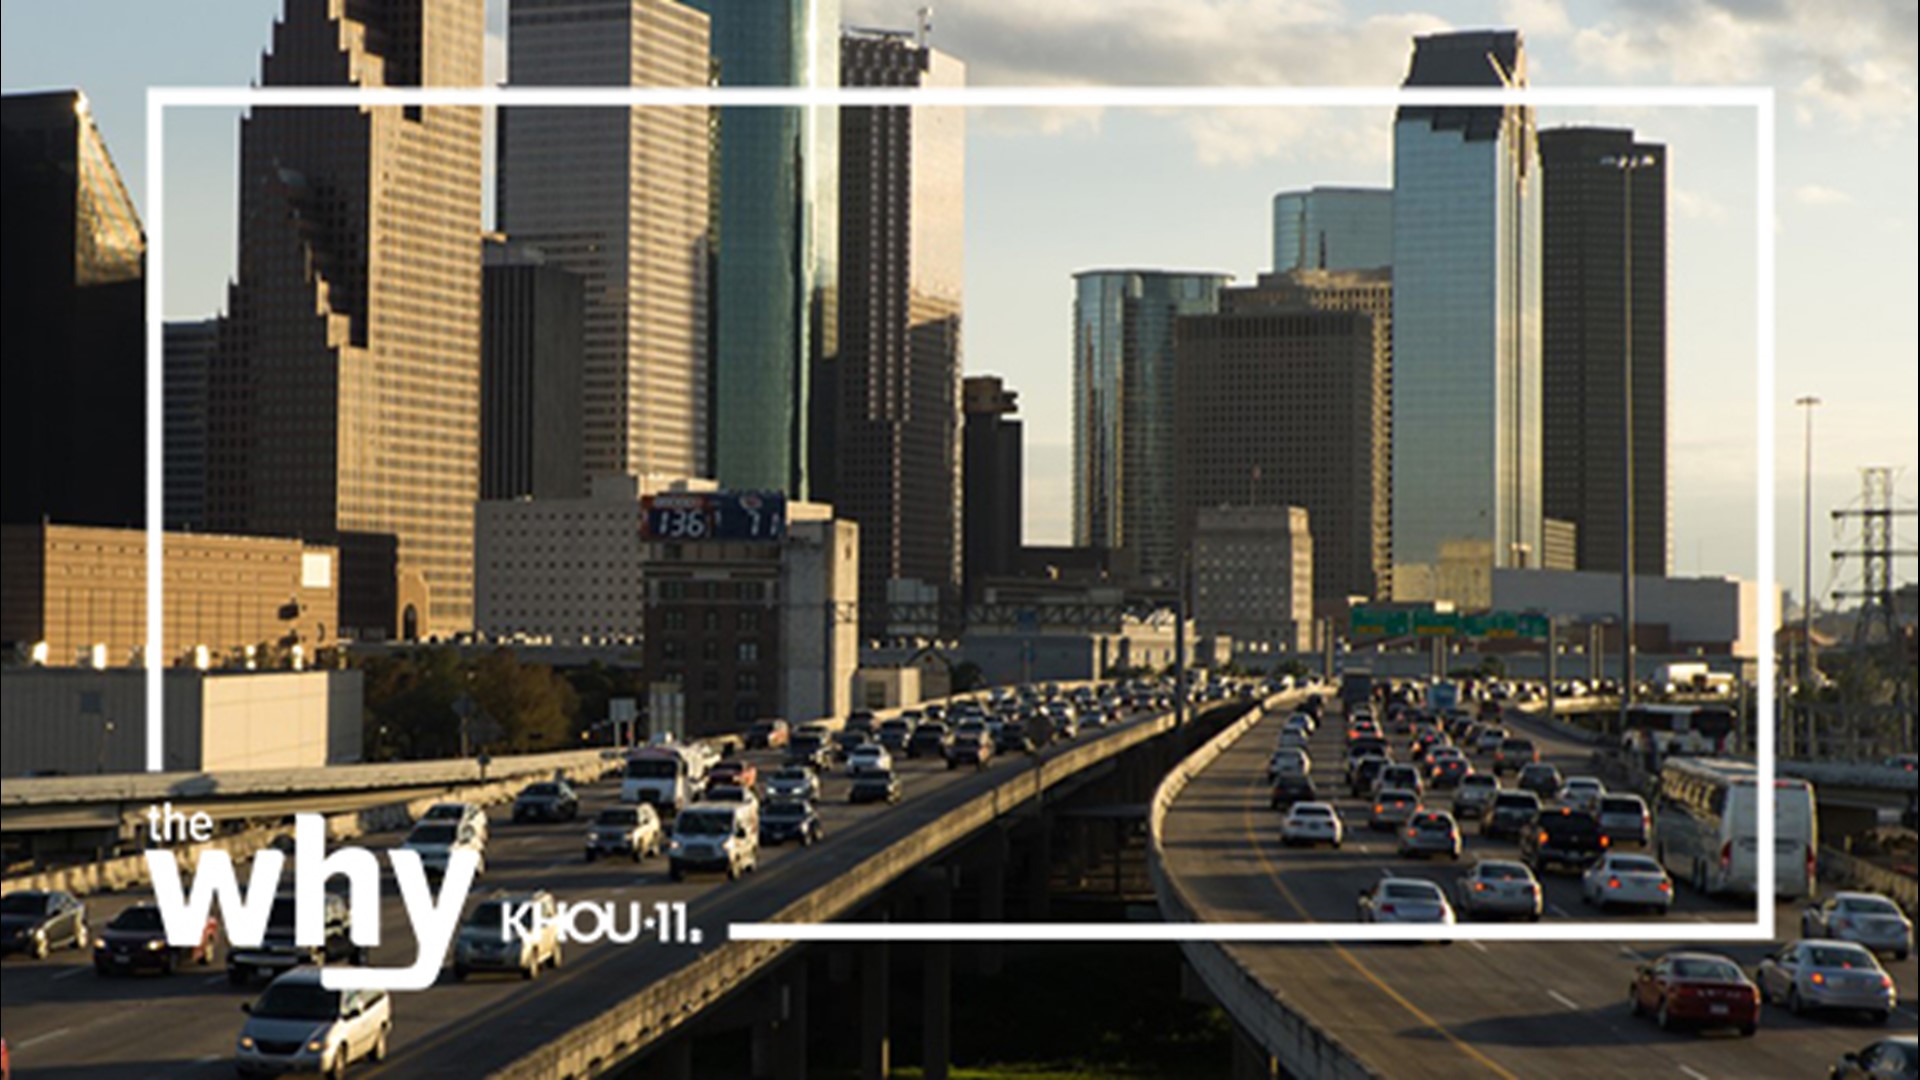 While driving in Houston traffic is a pain, your commute can actually serve a purpose